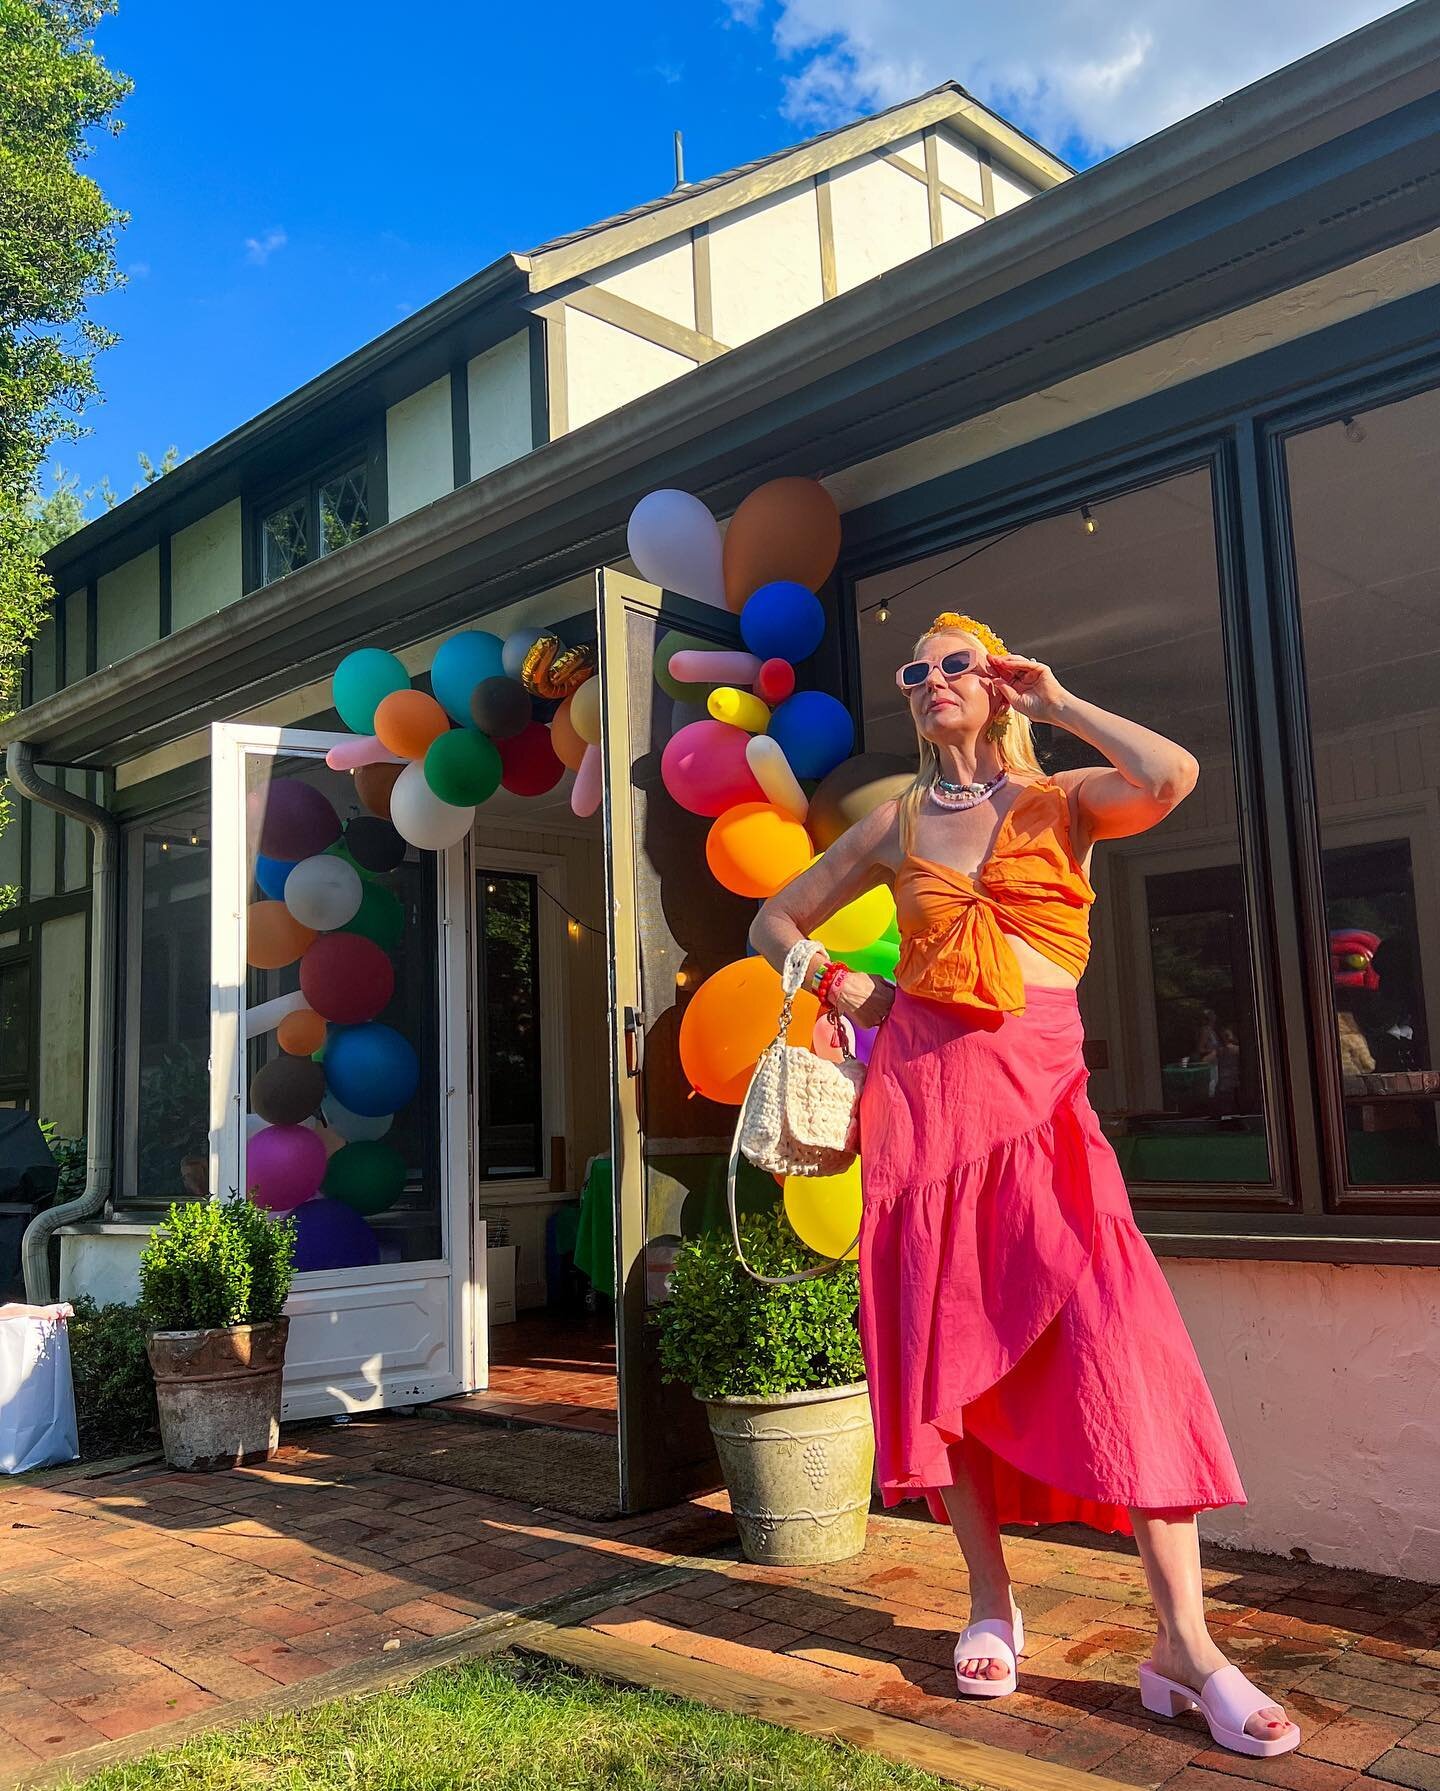 I&rsquo;m a B A R B I E Girl 🎉🏡🎈
&hellip;in the B A R B I E World 
🧡🩷
I was at my friend&rsquo;s son&rsquo;s bday party this past weekend and met a really friendly and funny friend of hers.
🩷🧡
She says upon seeing my outfit;
&ldquo;Oh, I guess